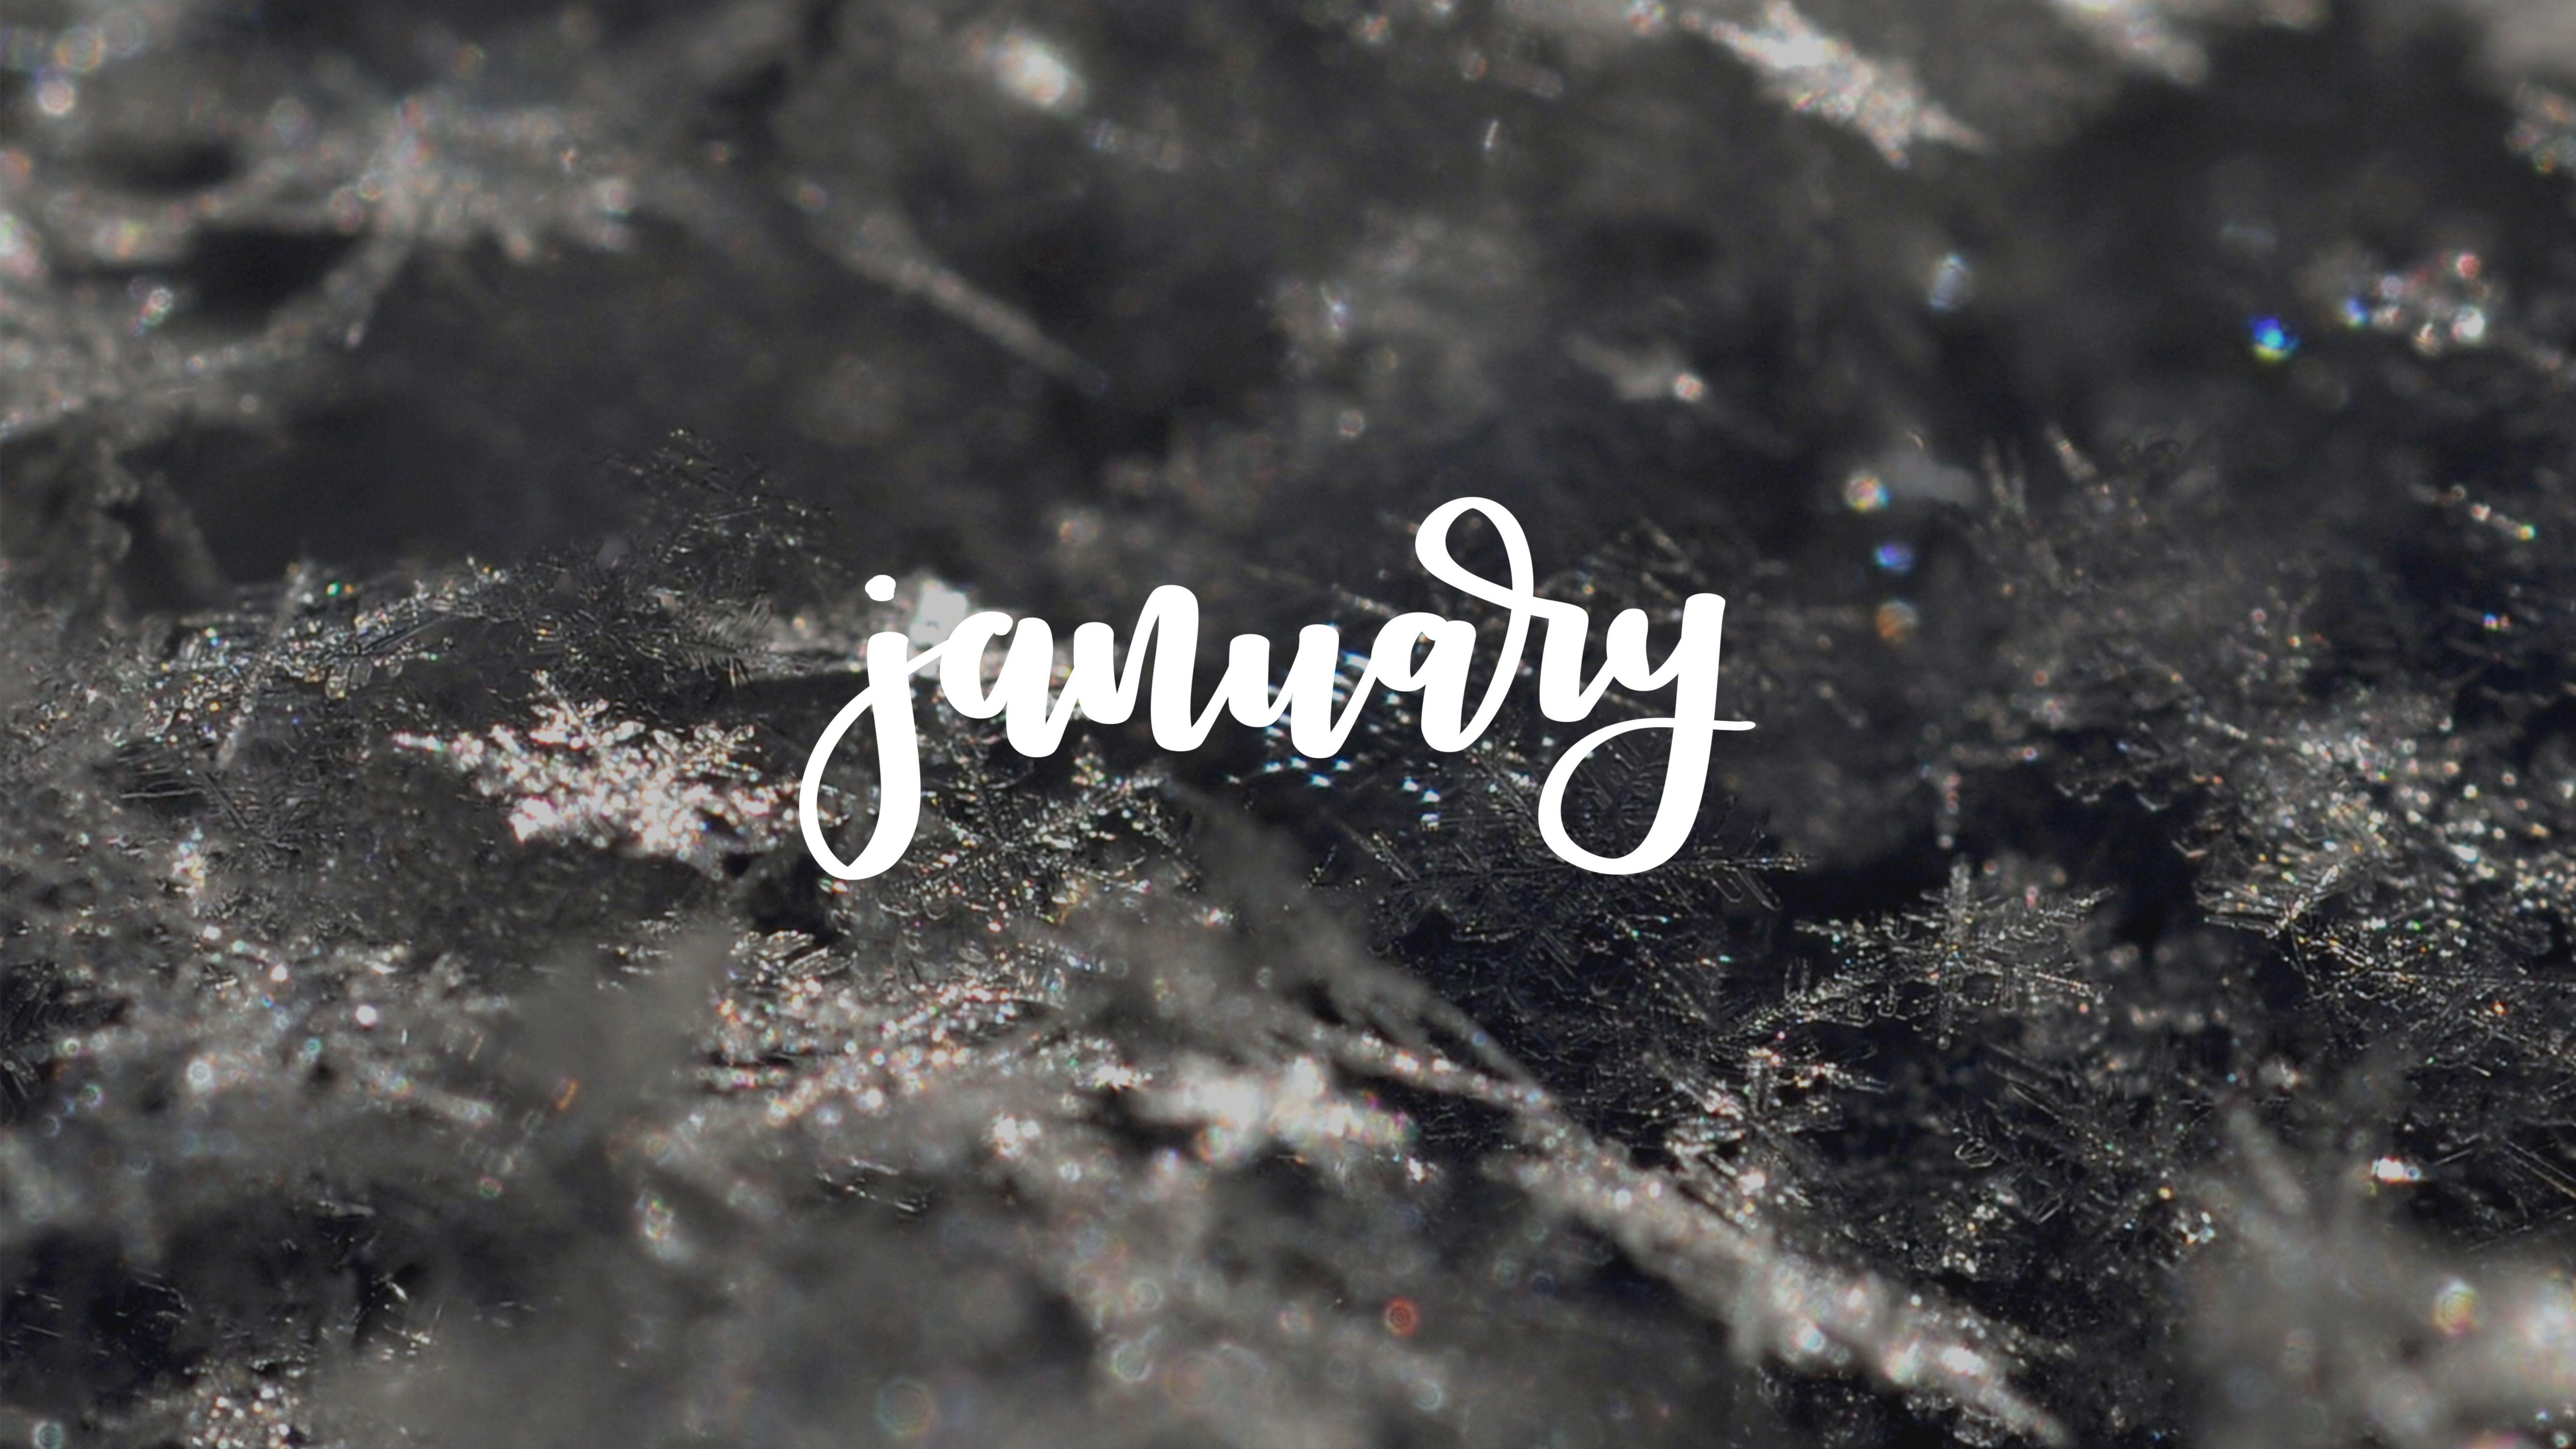 Aggregate 71+ wallpaper january best - in.cdgdbentre